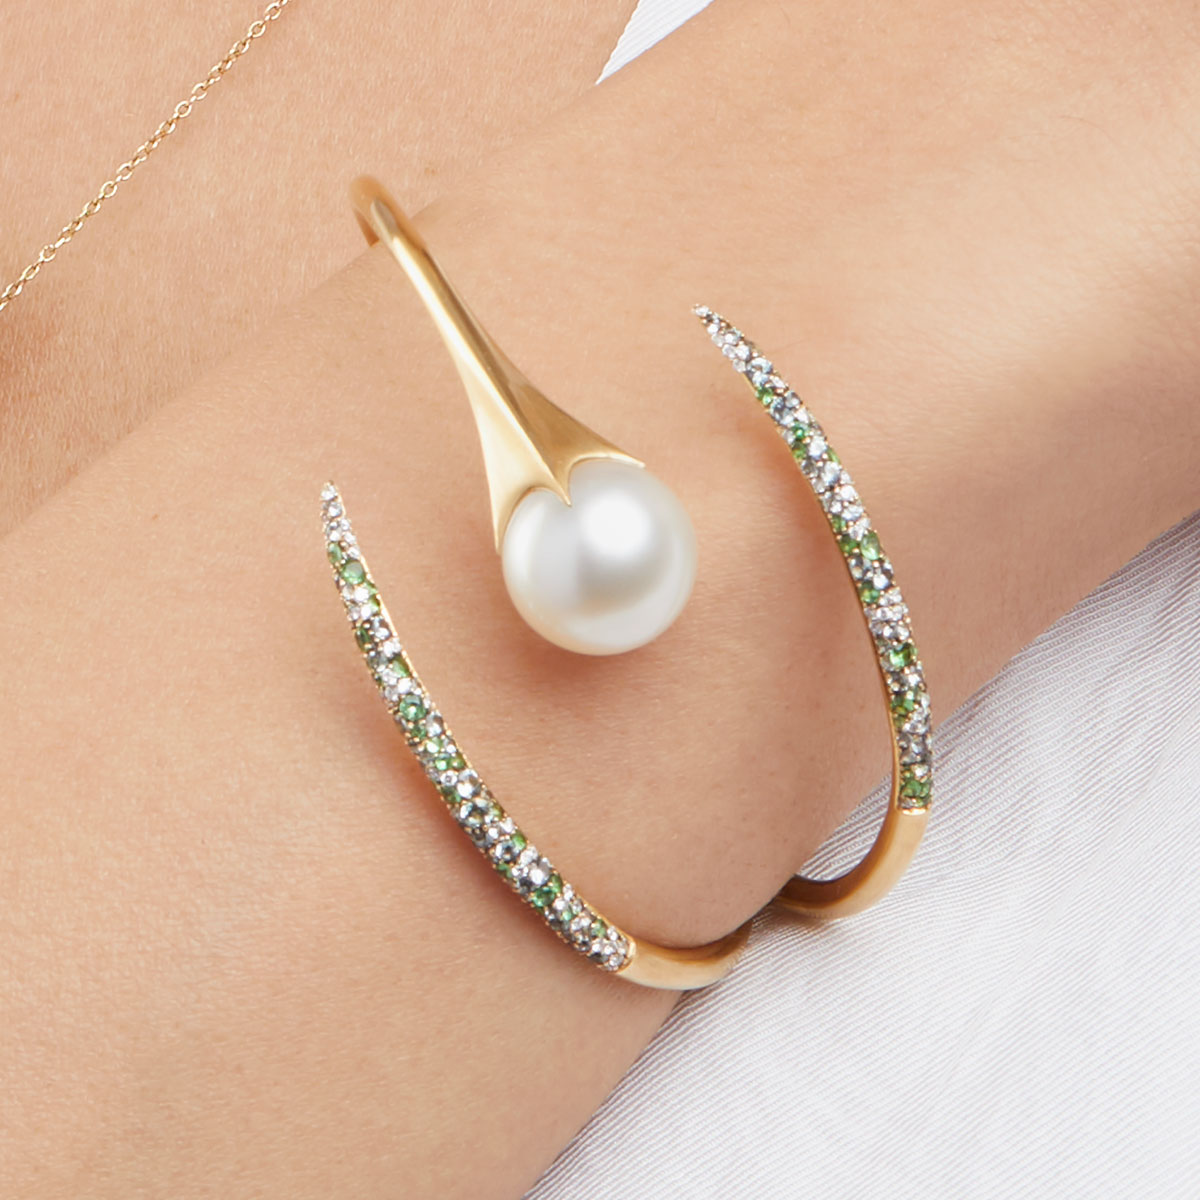 Hinged serpent cuff with white South Sea Pearl and pavé